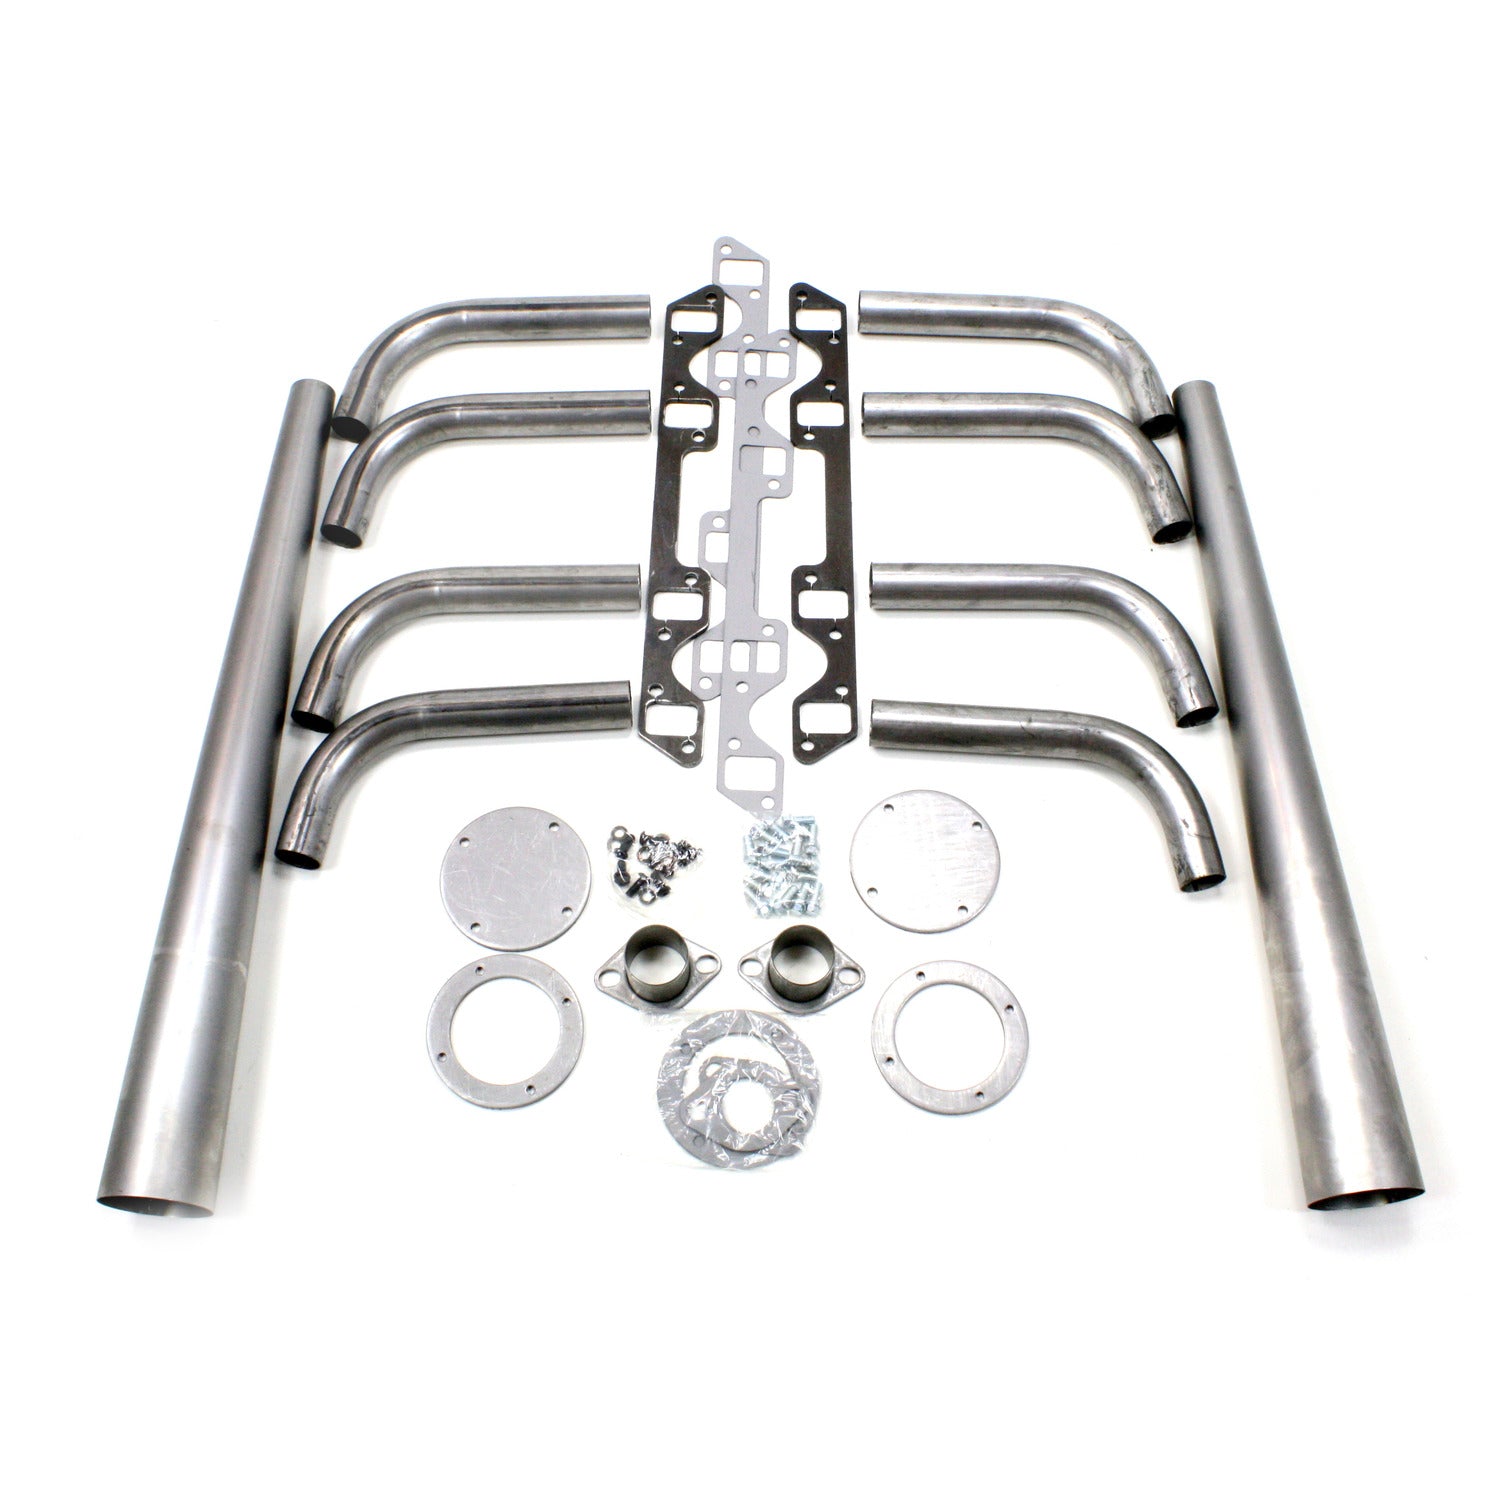 Patriot Exhaust H8504 1 5/8"x3 1/2" Header Lakester Weld-up Nail Head Buick